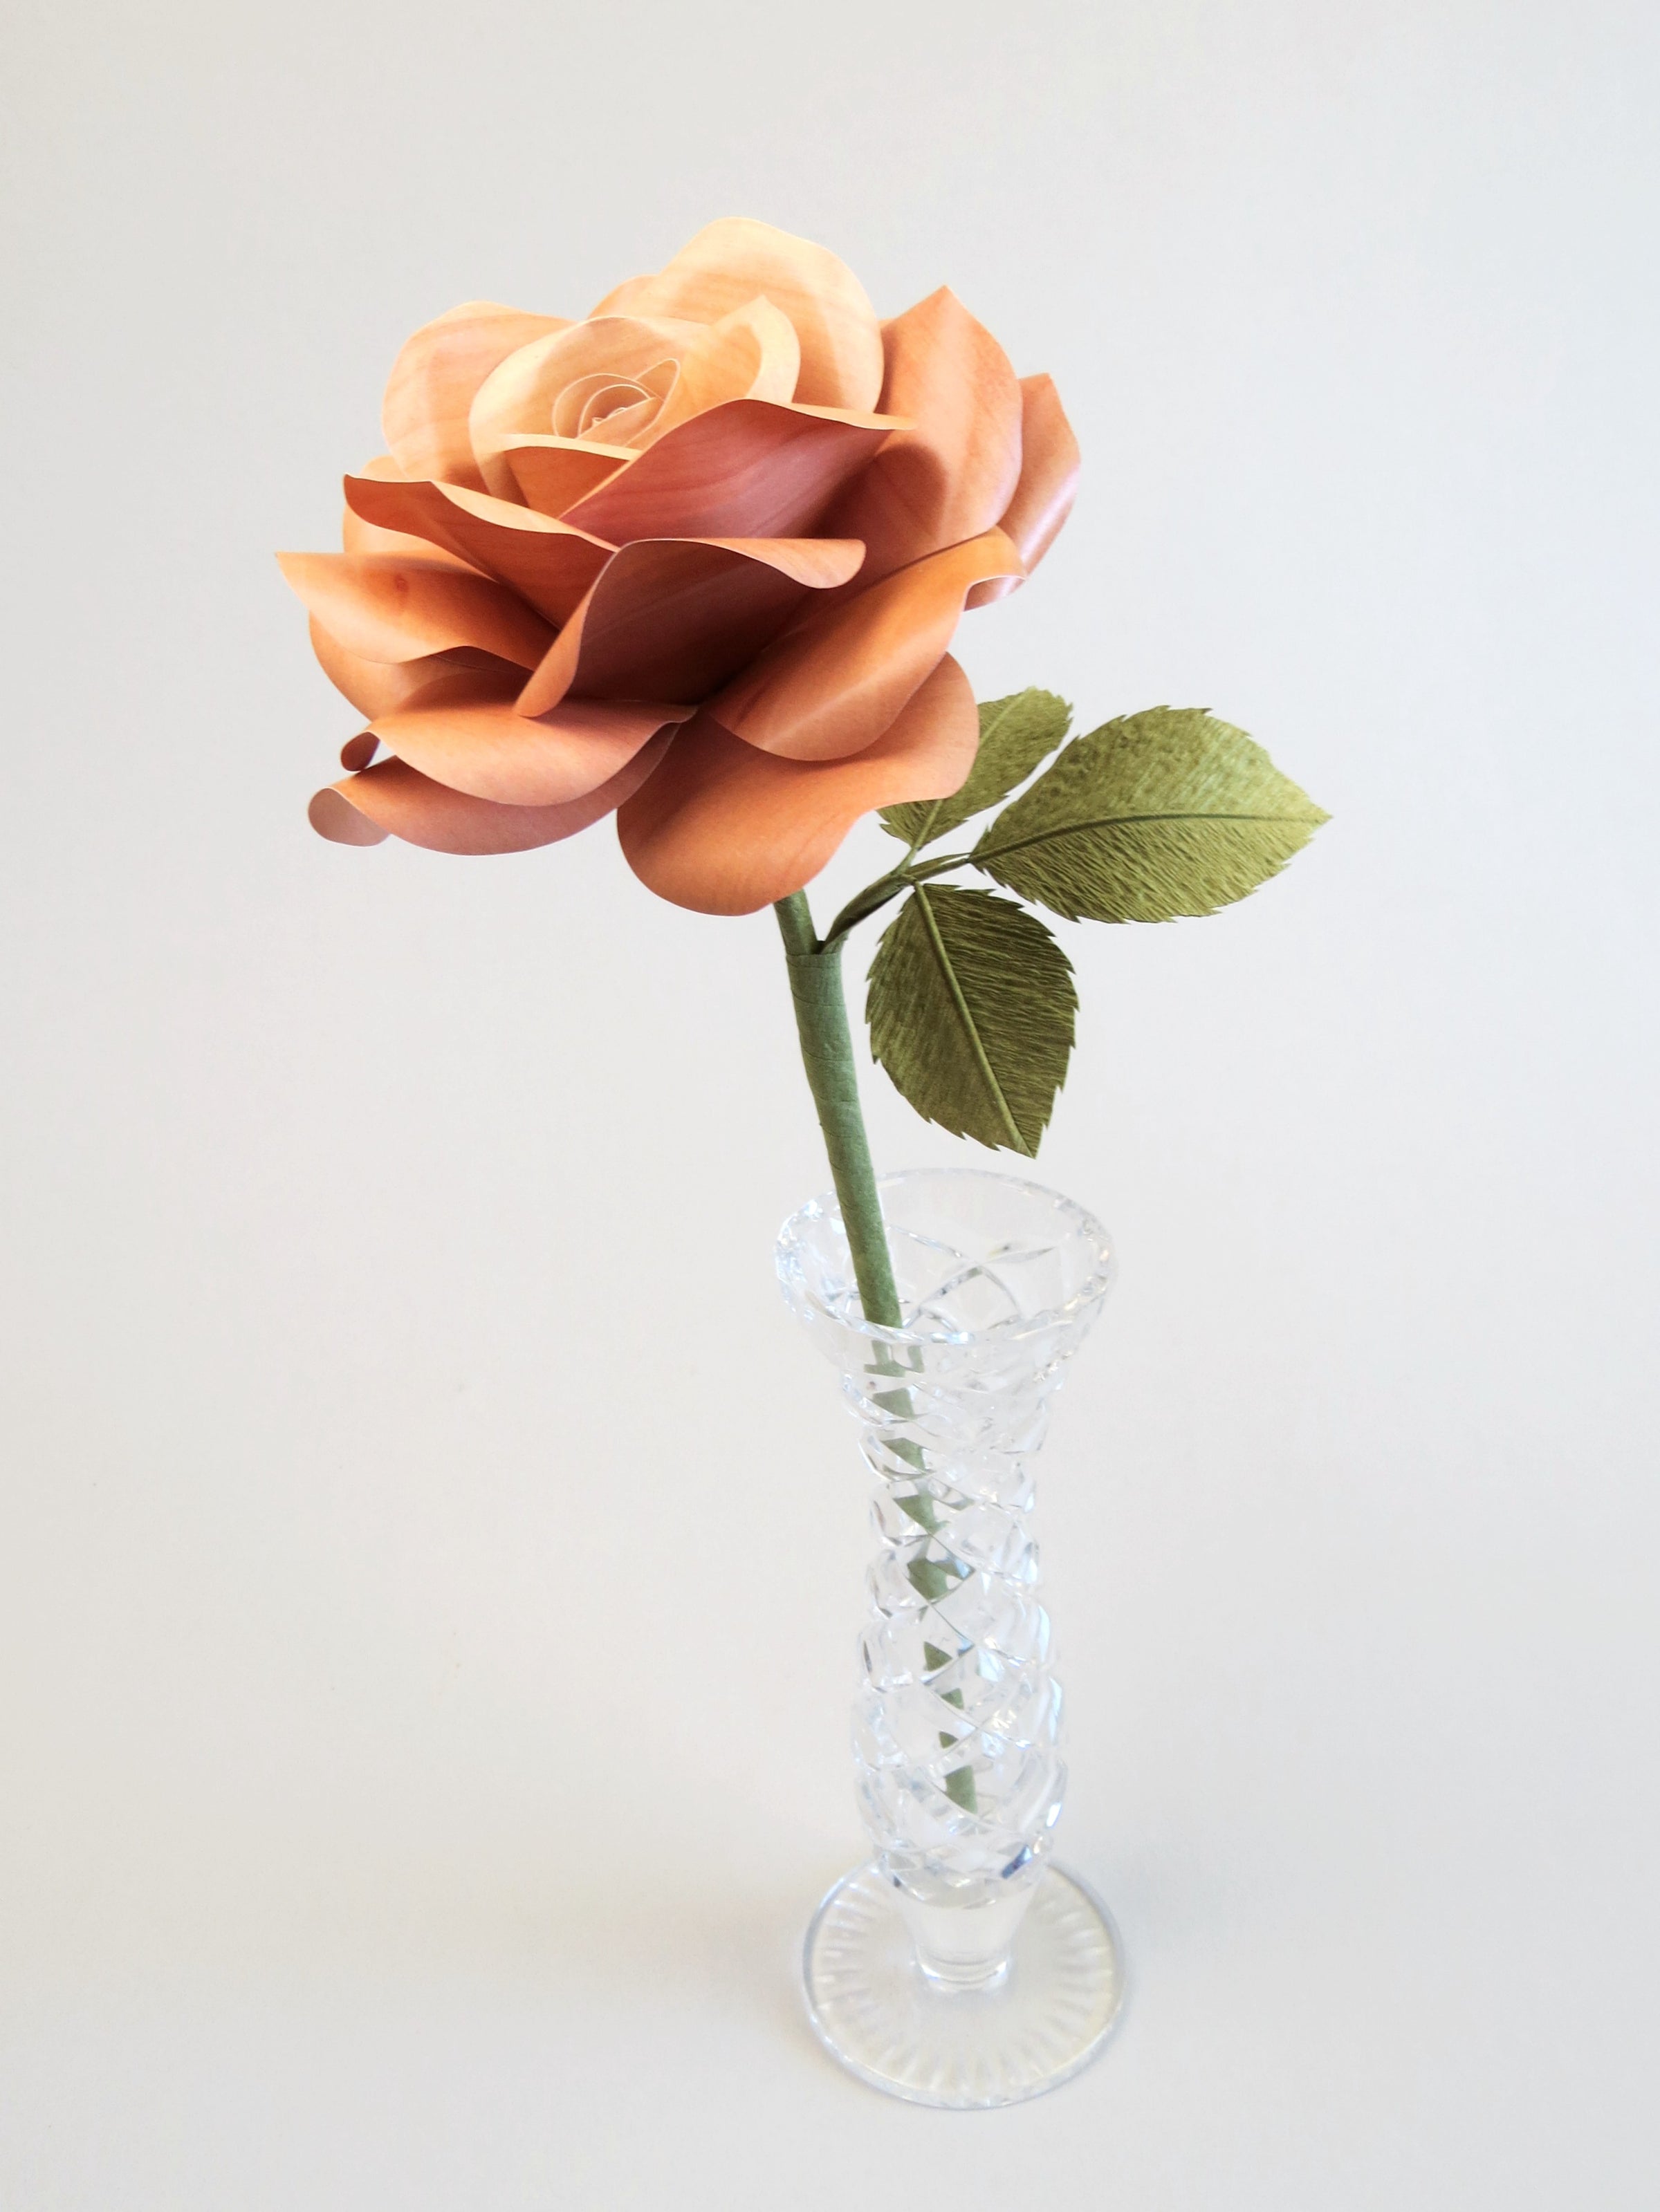 Light brown willow printed paper rose with three olive green leaves standing in a narrow glass vase against a light grey backdrop